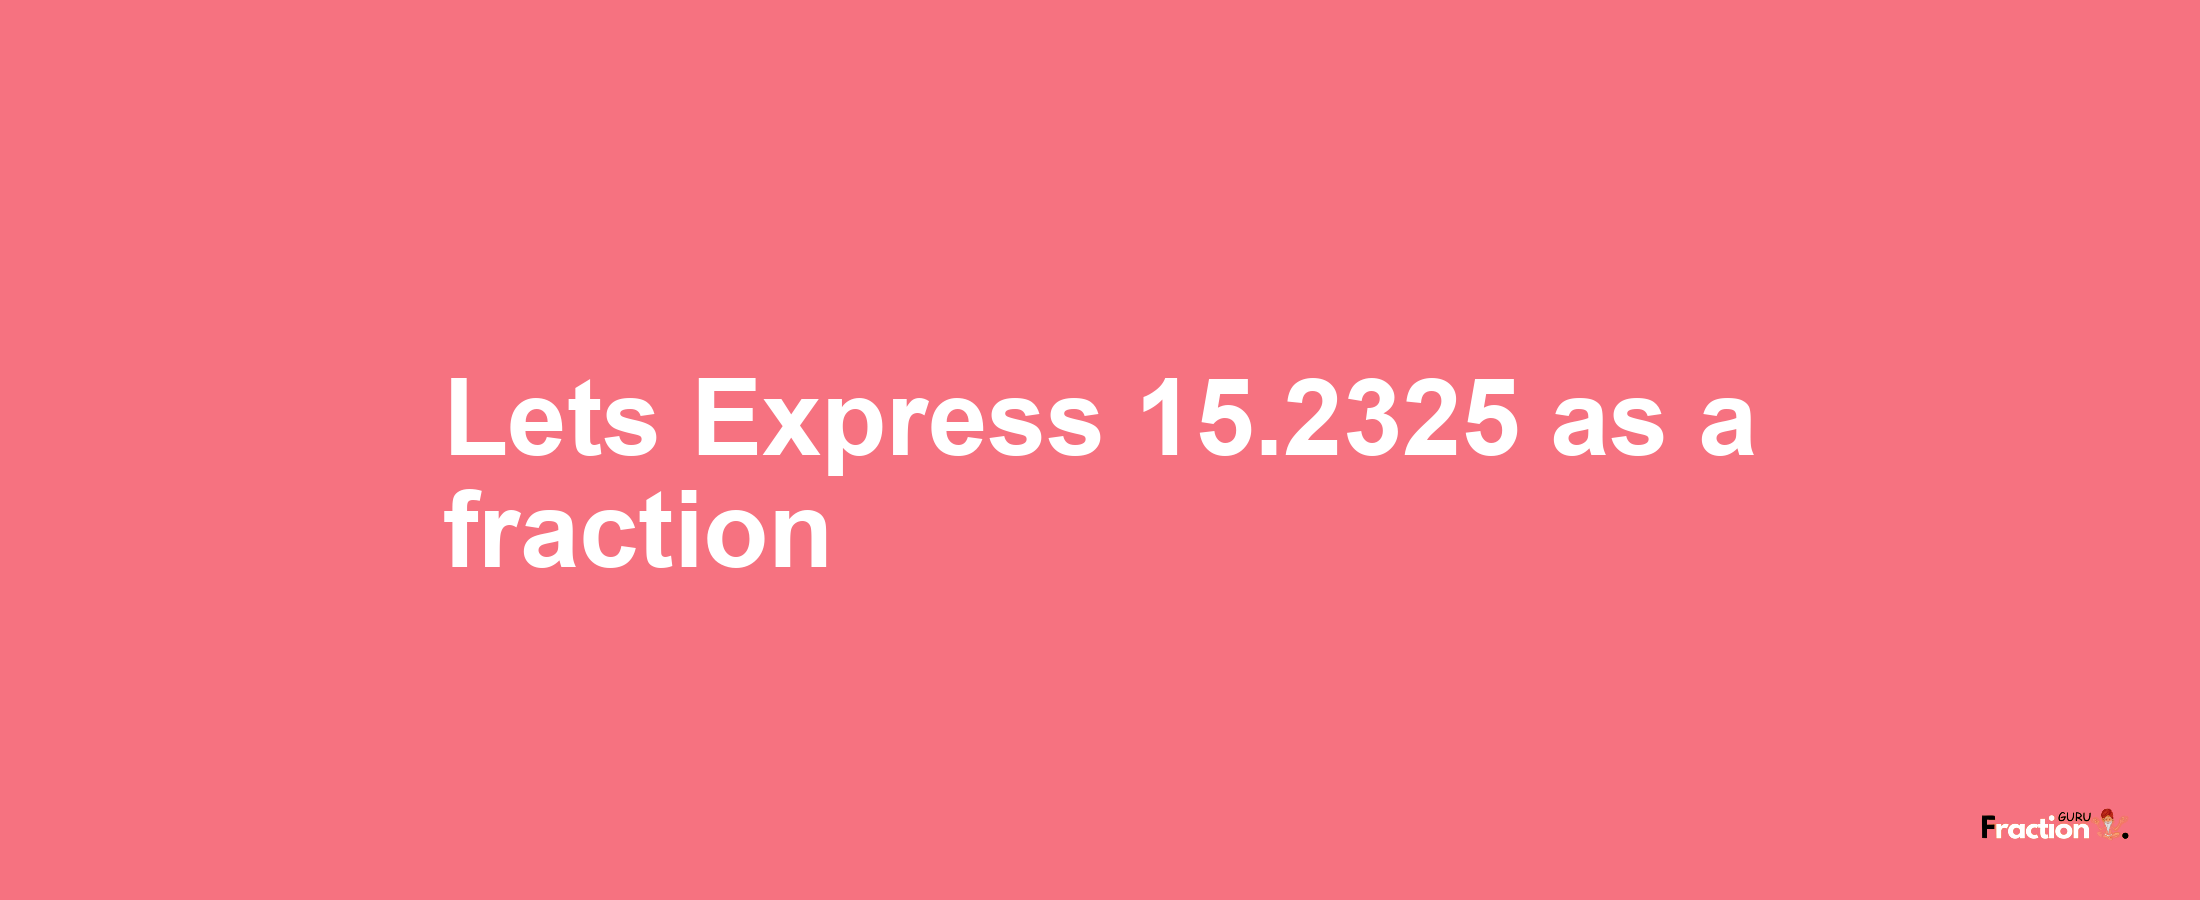 Lets Express 15.2325 as afraction